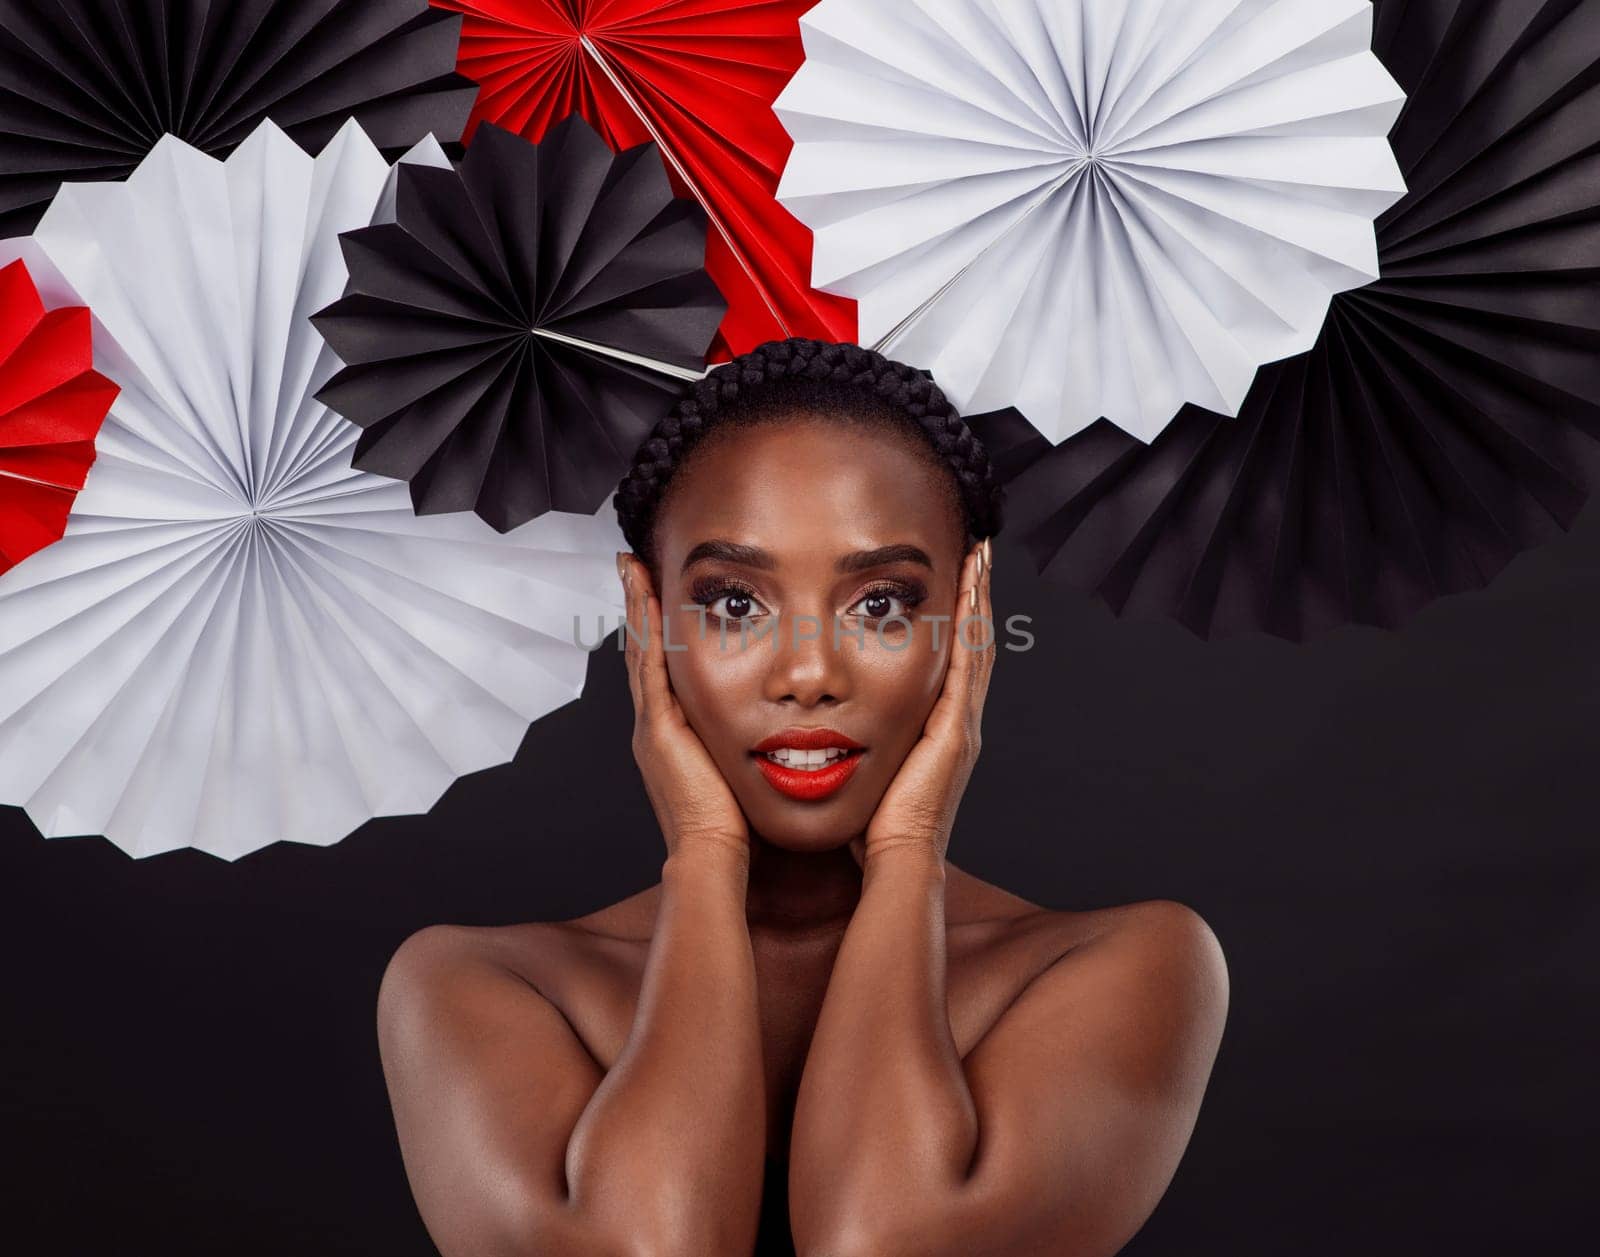 Female person, portrait and origami on hair in studio background for fashion with makeup, art and decor. African woman, artist and glamour for creativity, beauty or design with pride or confidence.